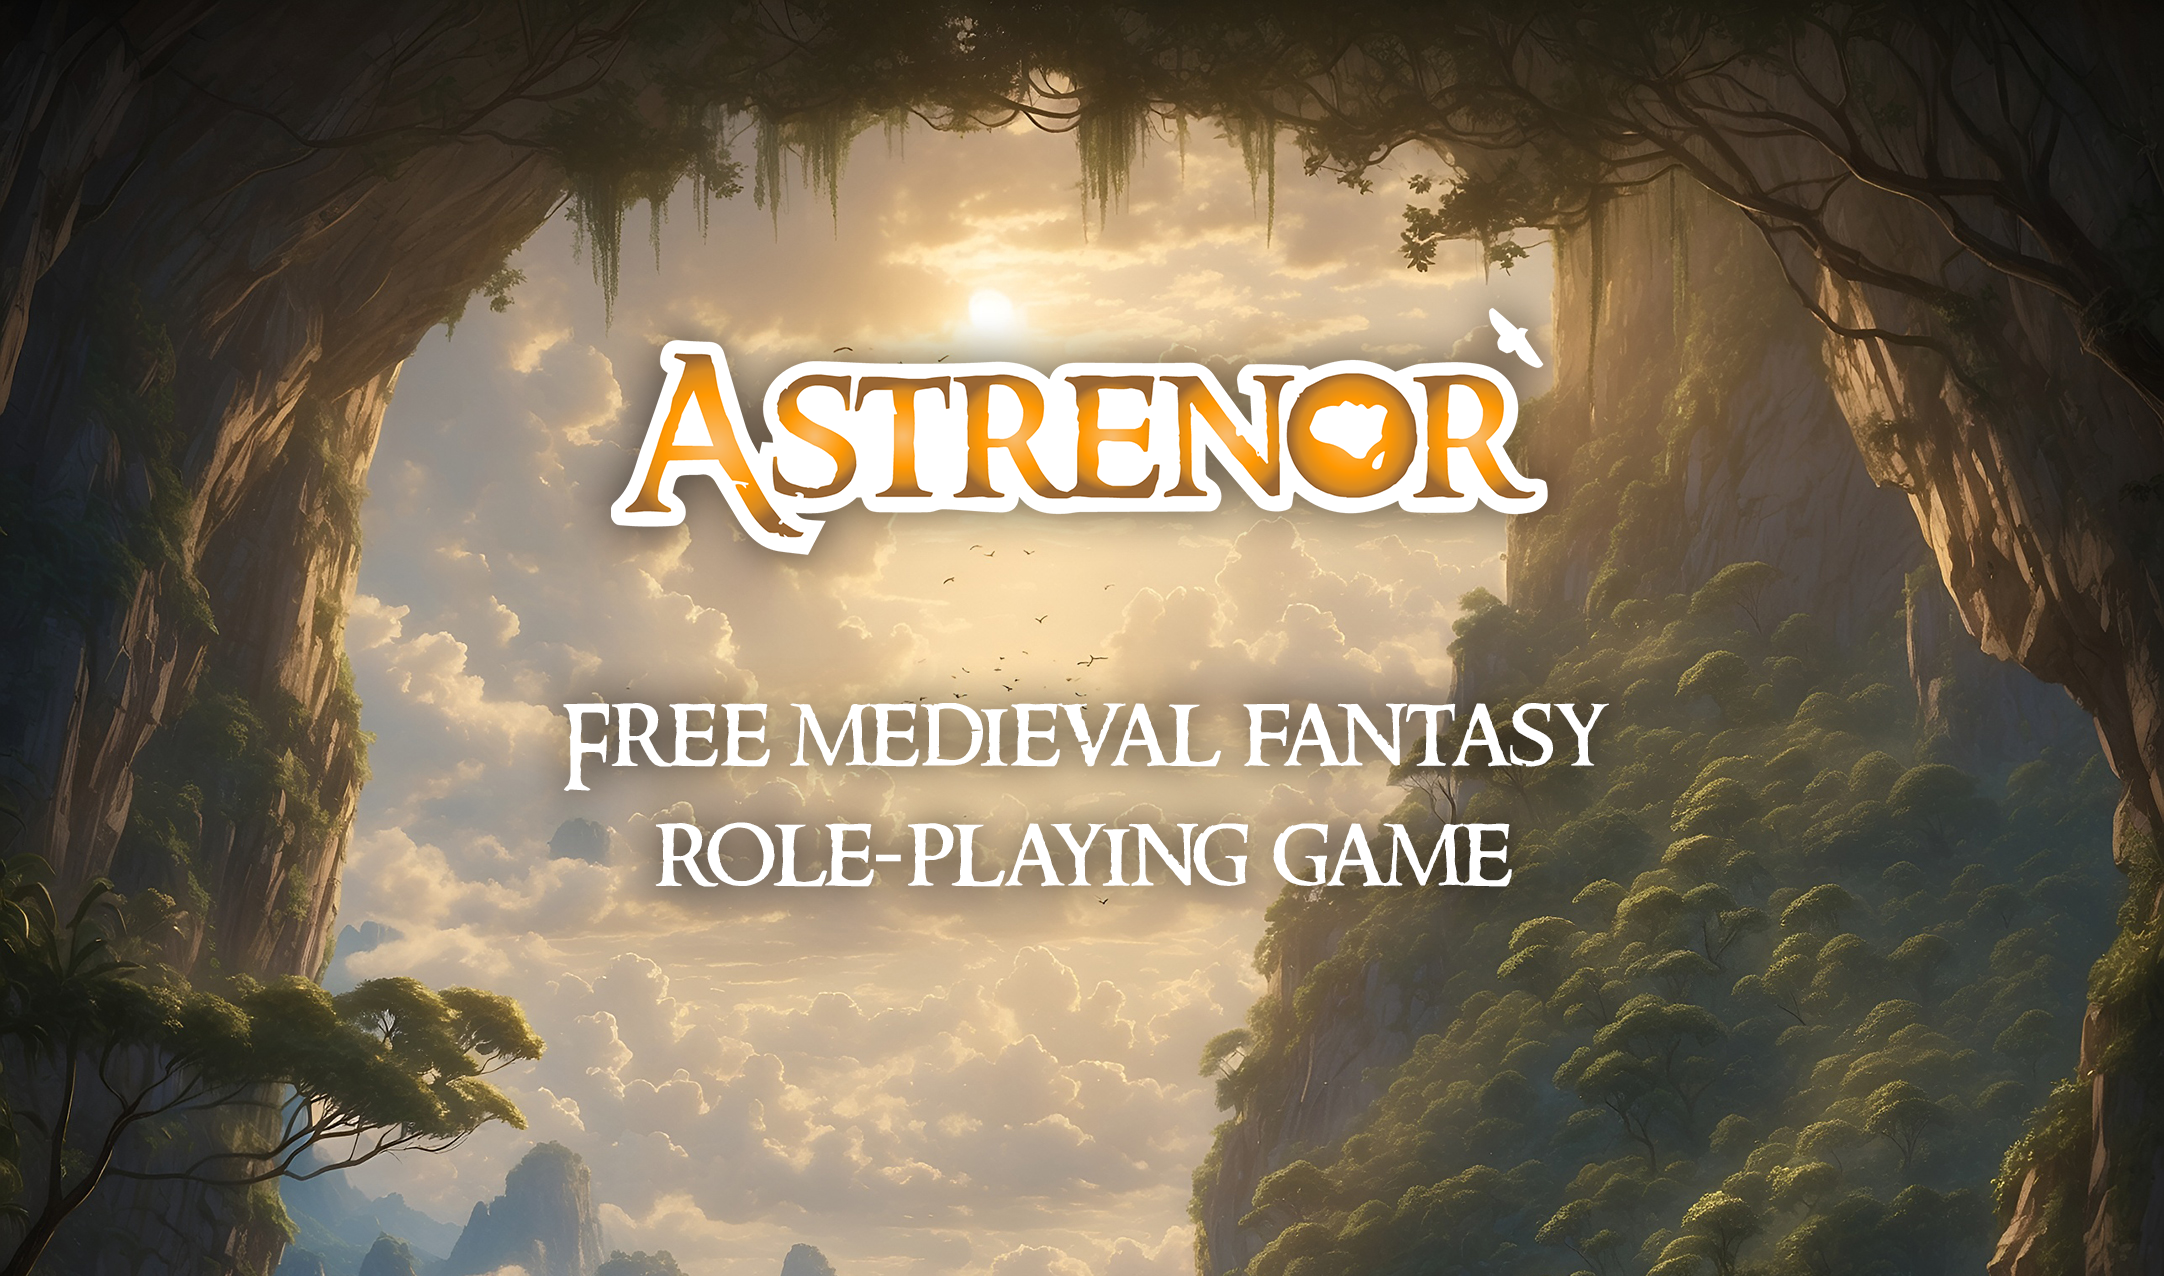 Astrenor, a free role-playing game with simple rules, ideal for beginners!